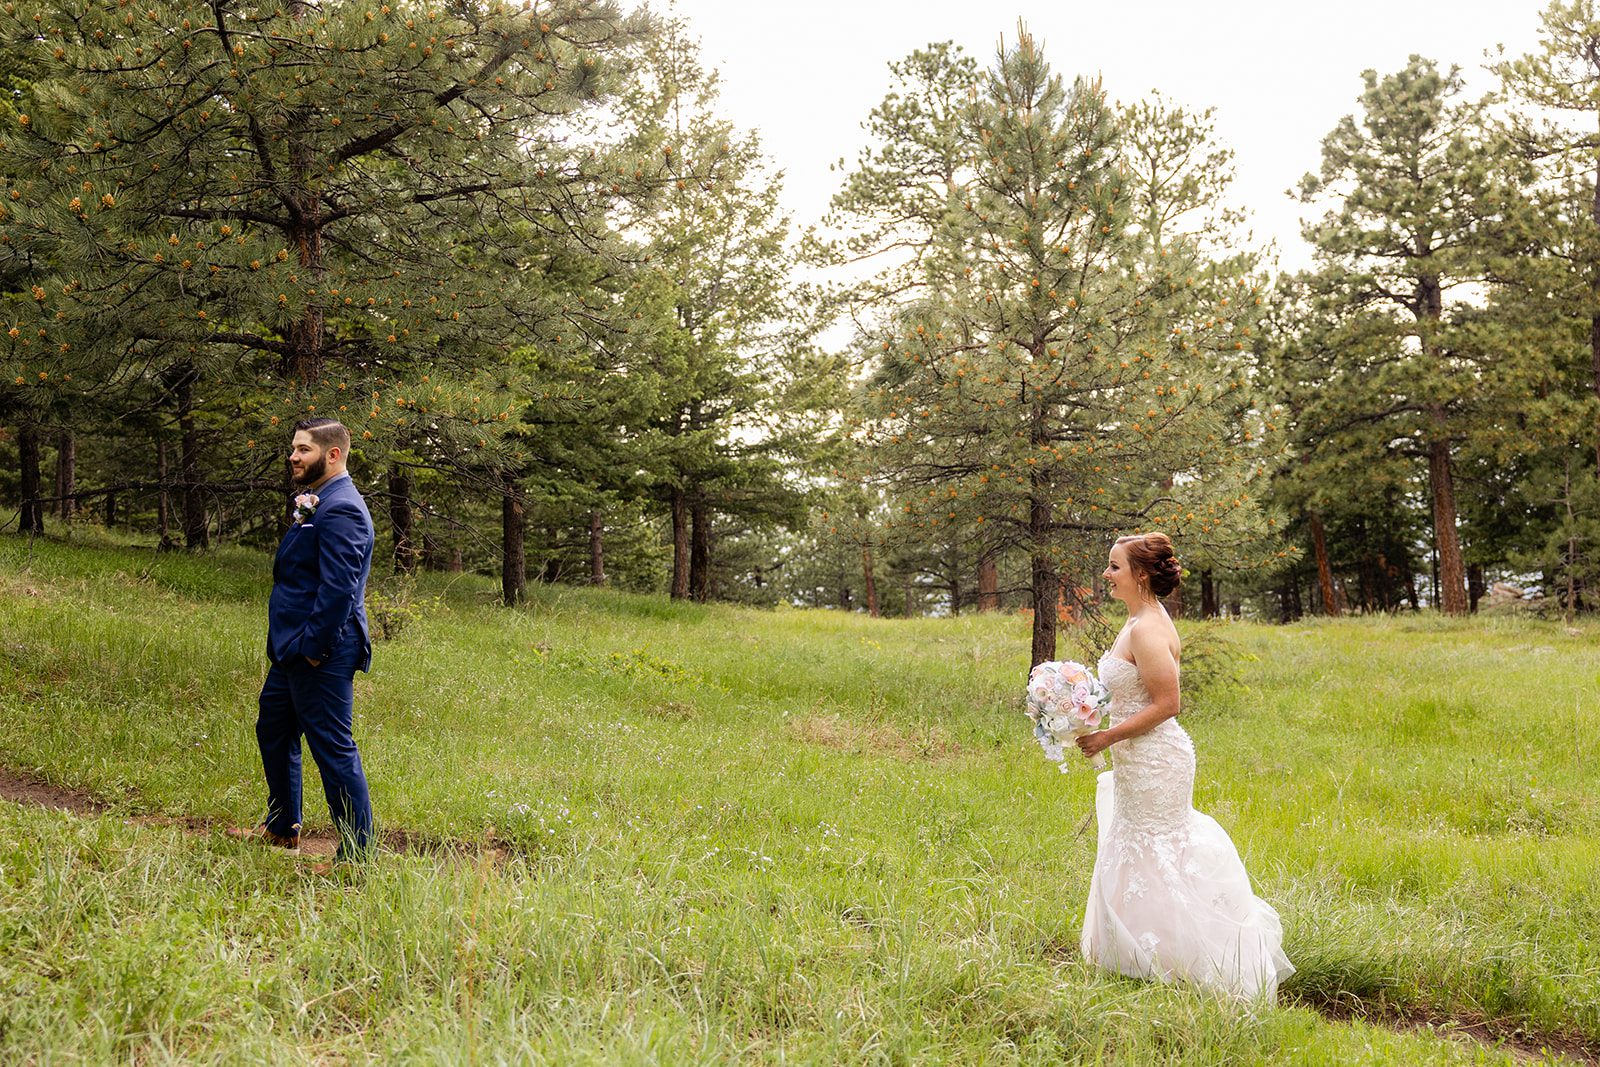 The bride and groom doing their first look a snapshot from their Boulder elopement with videography.